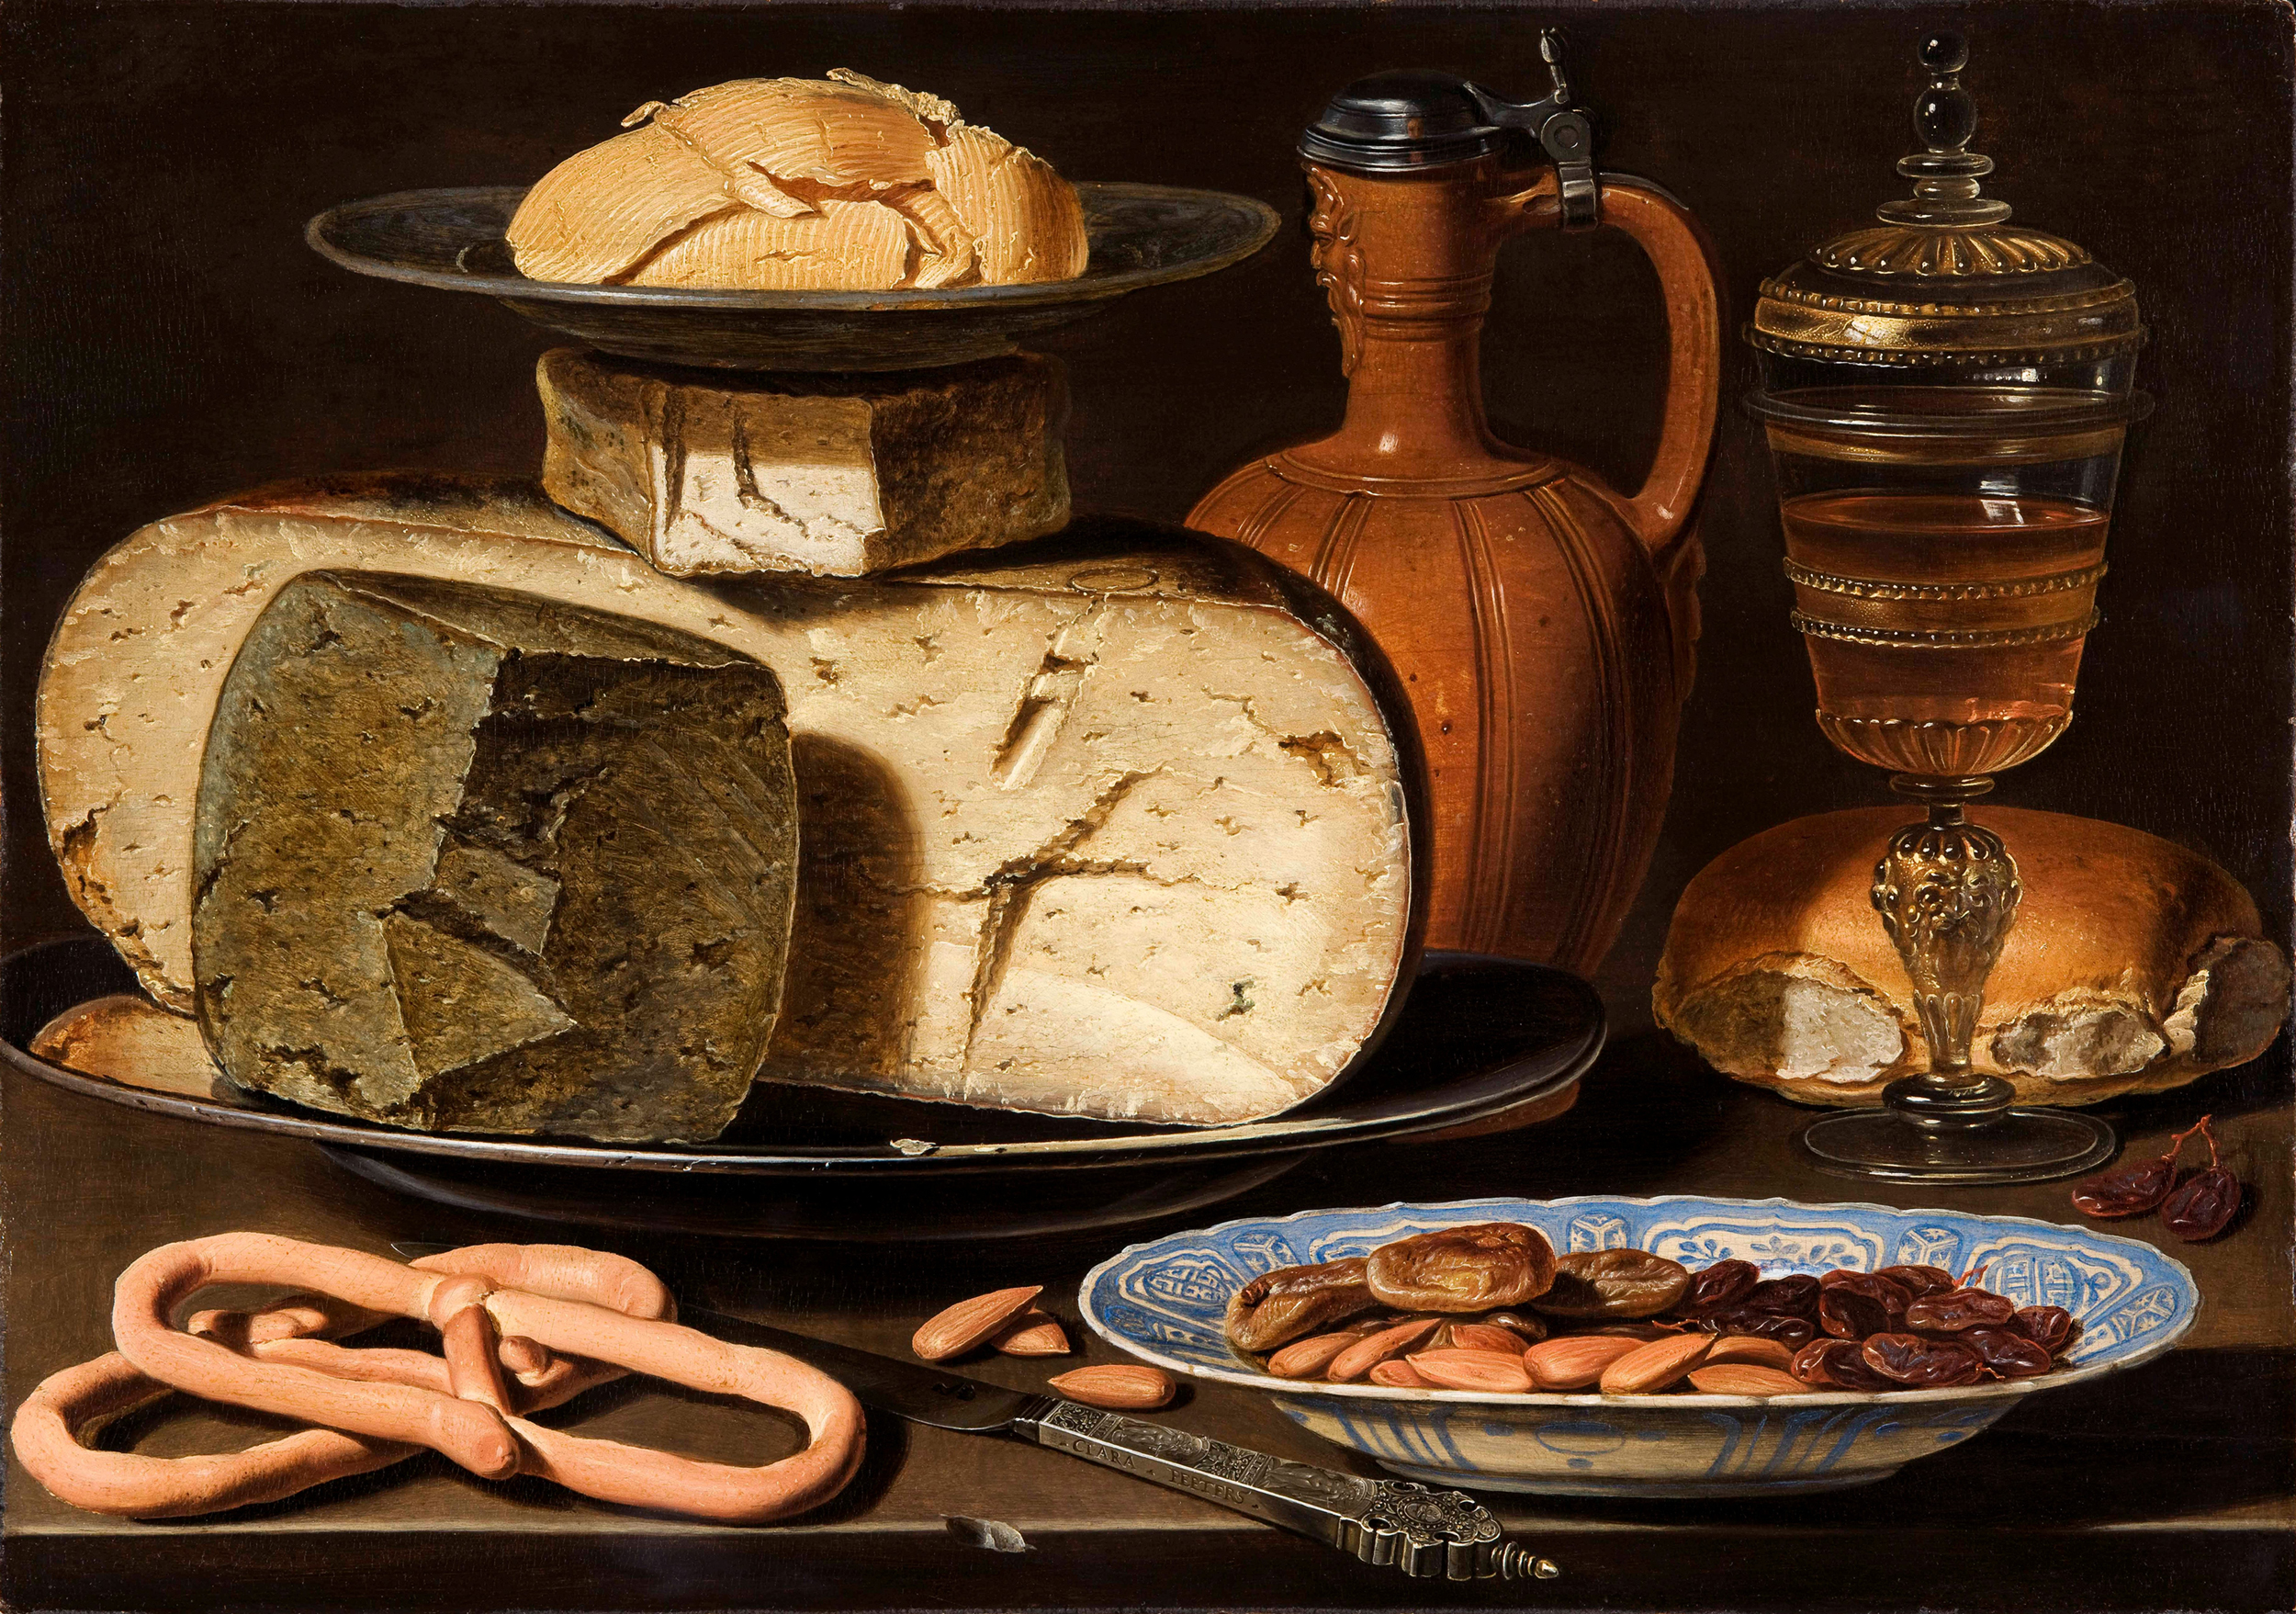 The Still Life with Cheeses, Almonds and Pretzels by Clara Peeters - c. 1615 - 34,5 x 49,5 cm Mauritshuis, The Hague